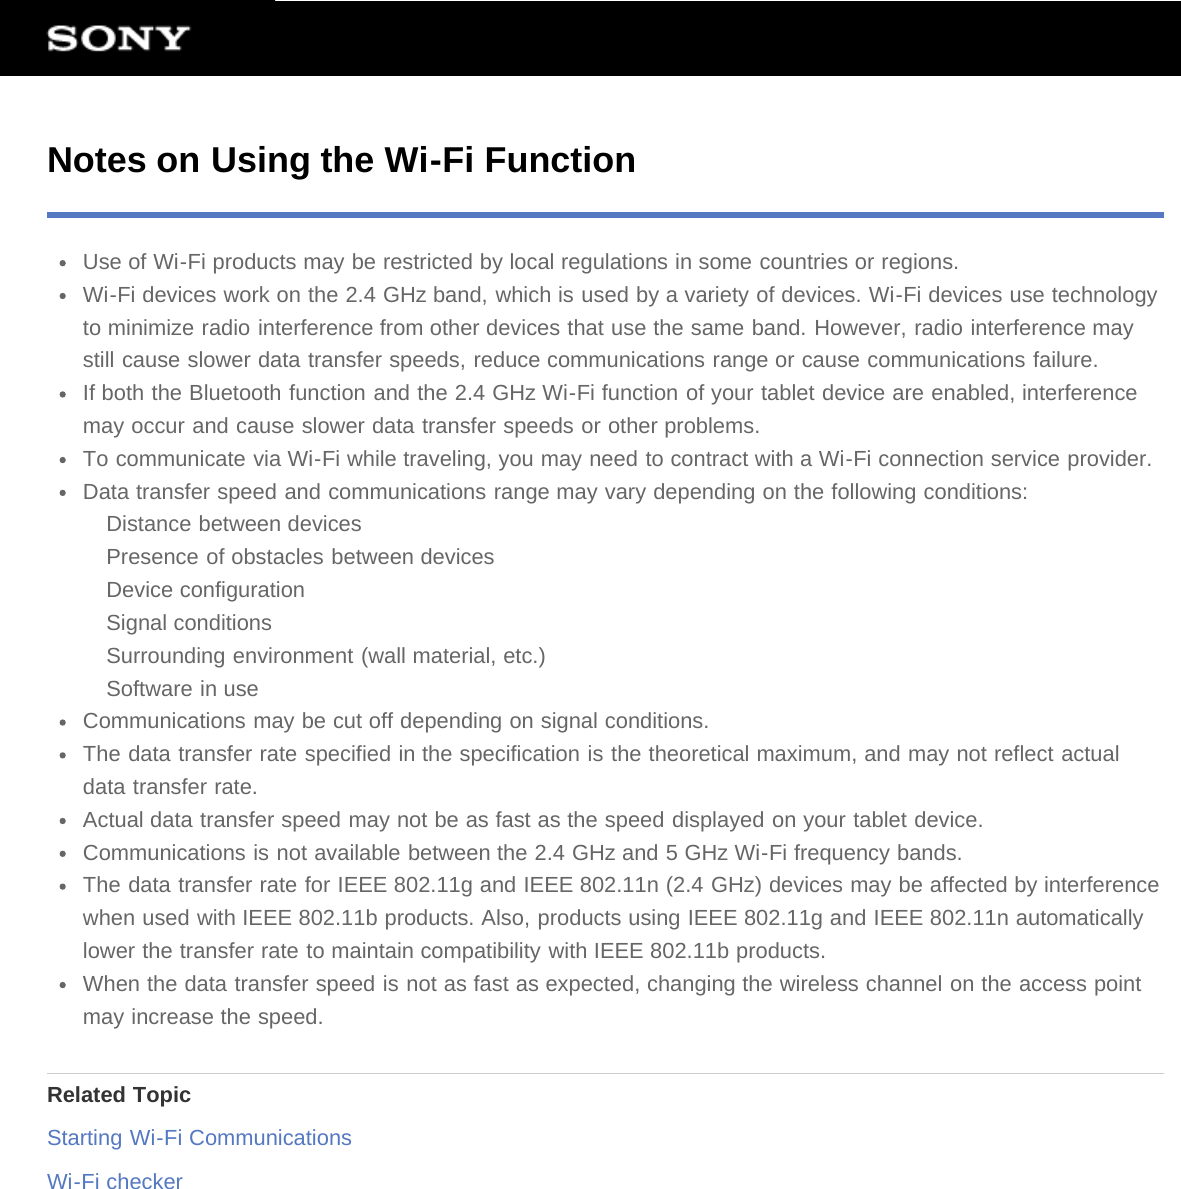 Notes on Using the Wi-Fi FunctionUse of Wi-Fi products may be restricted by local regulations in some countries or regions.Wi-Fi devices work on the 2.4 GHz band, which is used by a variety of devices. Wi-Fi devices use technologyto minimize radio interference from other devices that use the same band. However, radio interference maystill cause slower data transfer speeds, reduce communications range or cause communications failure.If both the Bluetooth function and the 2.4 GHz Wi-Fi function of your tablet device are enabled, interferencemay occur and cause slower data transfer speeds or other problems.To communicate via Wi-Fi while traveling, you may need to contract with a Wi-Fi connection service provider.Data transfer speed and communications range may vary depending on the following conditions:Distance between devicesPresence of obstacles between devicesDevice configurationSignal conditionsSurrounding environment (wall material, etc.)Software in useCommunications may be cut off depending on signal conditions.The data transfer rate specified in the specification is the theoretical maximum, and may not reflect actualdata transfer rate.Actual data transfer speed may not be as fast as the speed displayed on your tablet device.Communications is not available between the 2.4 GHz and 5 GHz Wi-Fi frequency bands.The data transfer rate for IEEE 802.11g and IEEE 802.11n (2.4 GHz) devices may be affected by interferencewhen used with IEEE 802.11b products. Also, products using IEEE 802.11g and IEEE 802.11n automaticallylower the transfer rate to maintain compatibility with IEEE 802.11b products.When the data transfer speed is not as fast as expected, changing the wireless channel on the access pointmay increase the speed.Related TopicStarting Wi-Fi CommunicationsWi-Fi checker